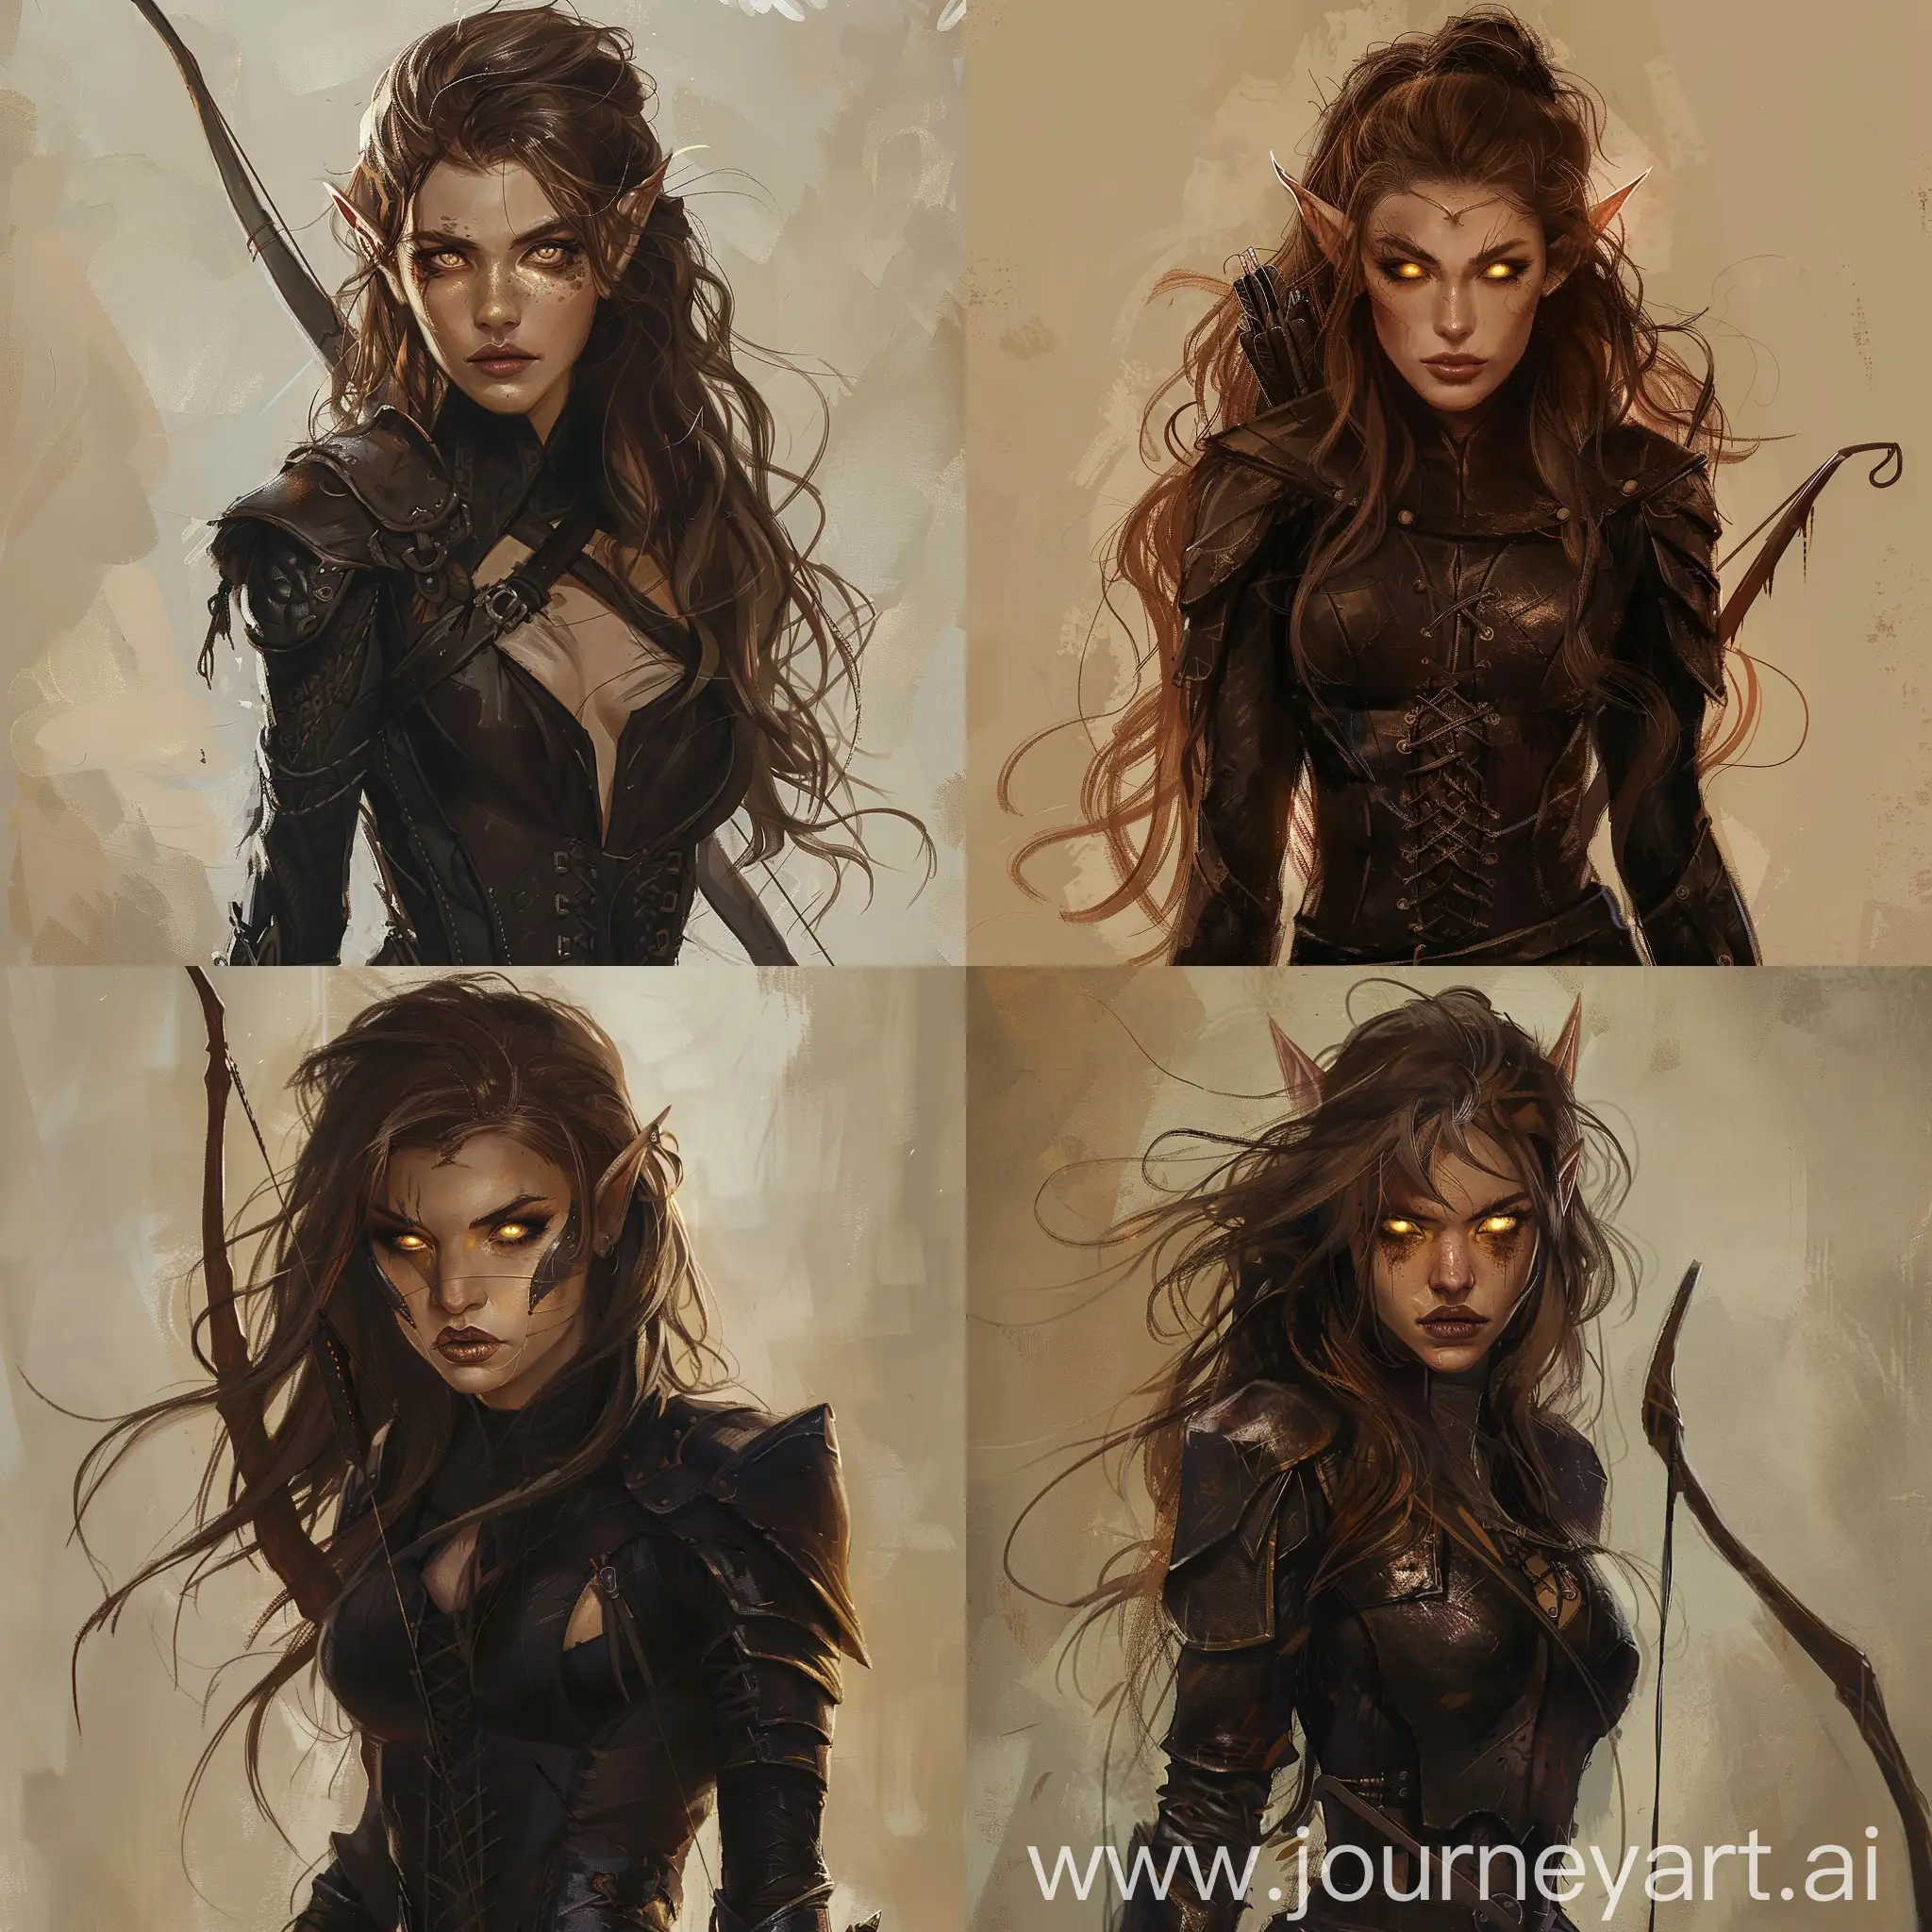 Sinister-Wood-Elf-Woman-in-Black-Leather-Armor-with-Longbow